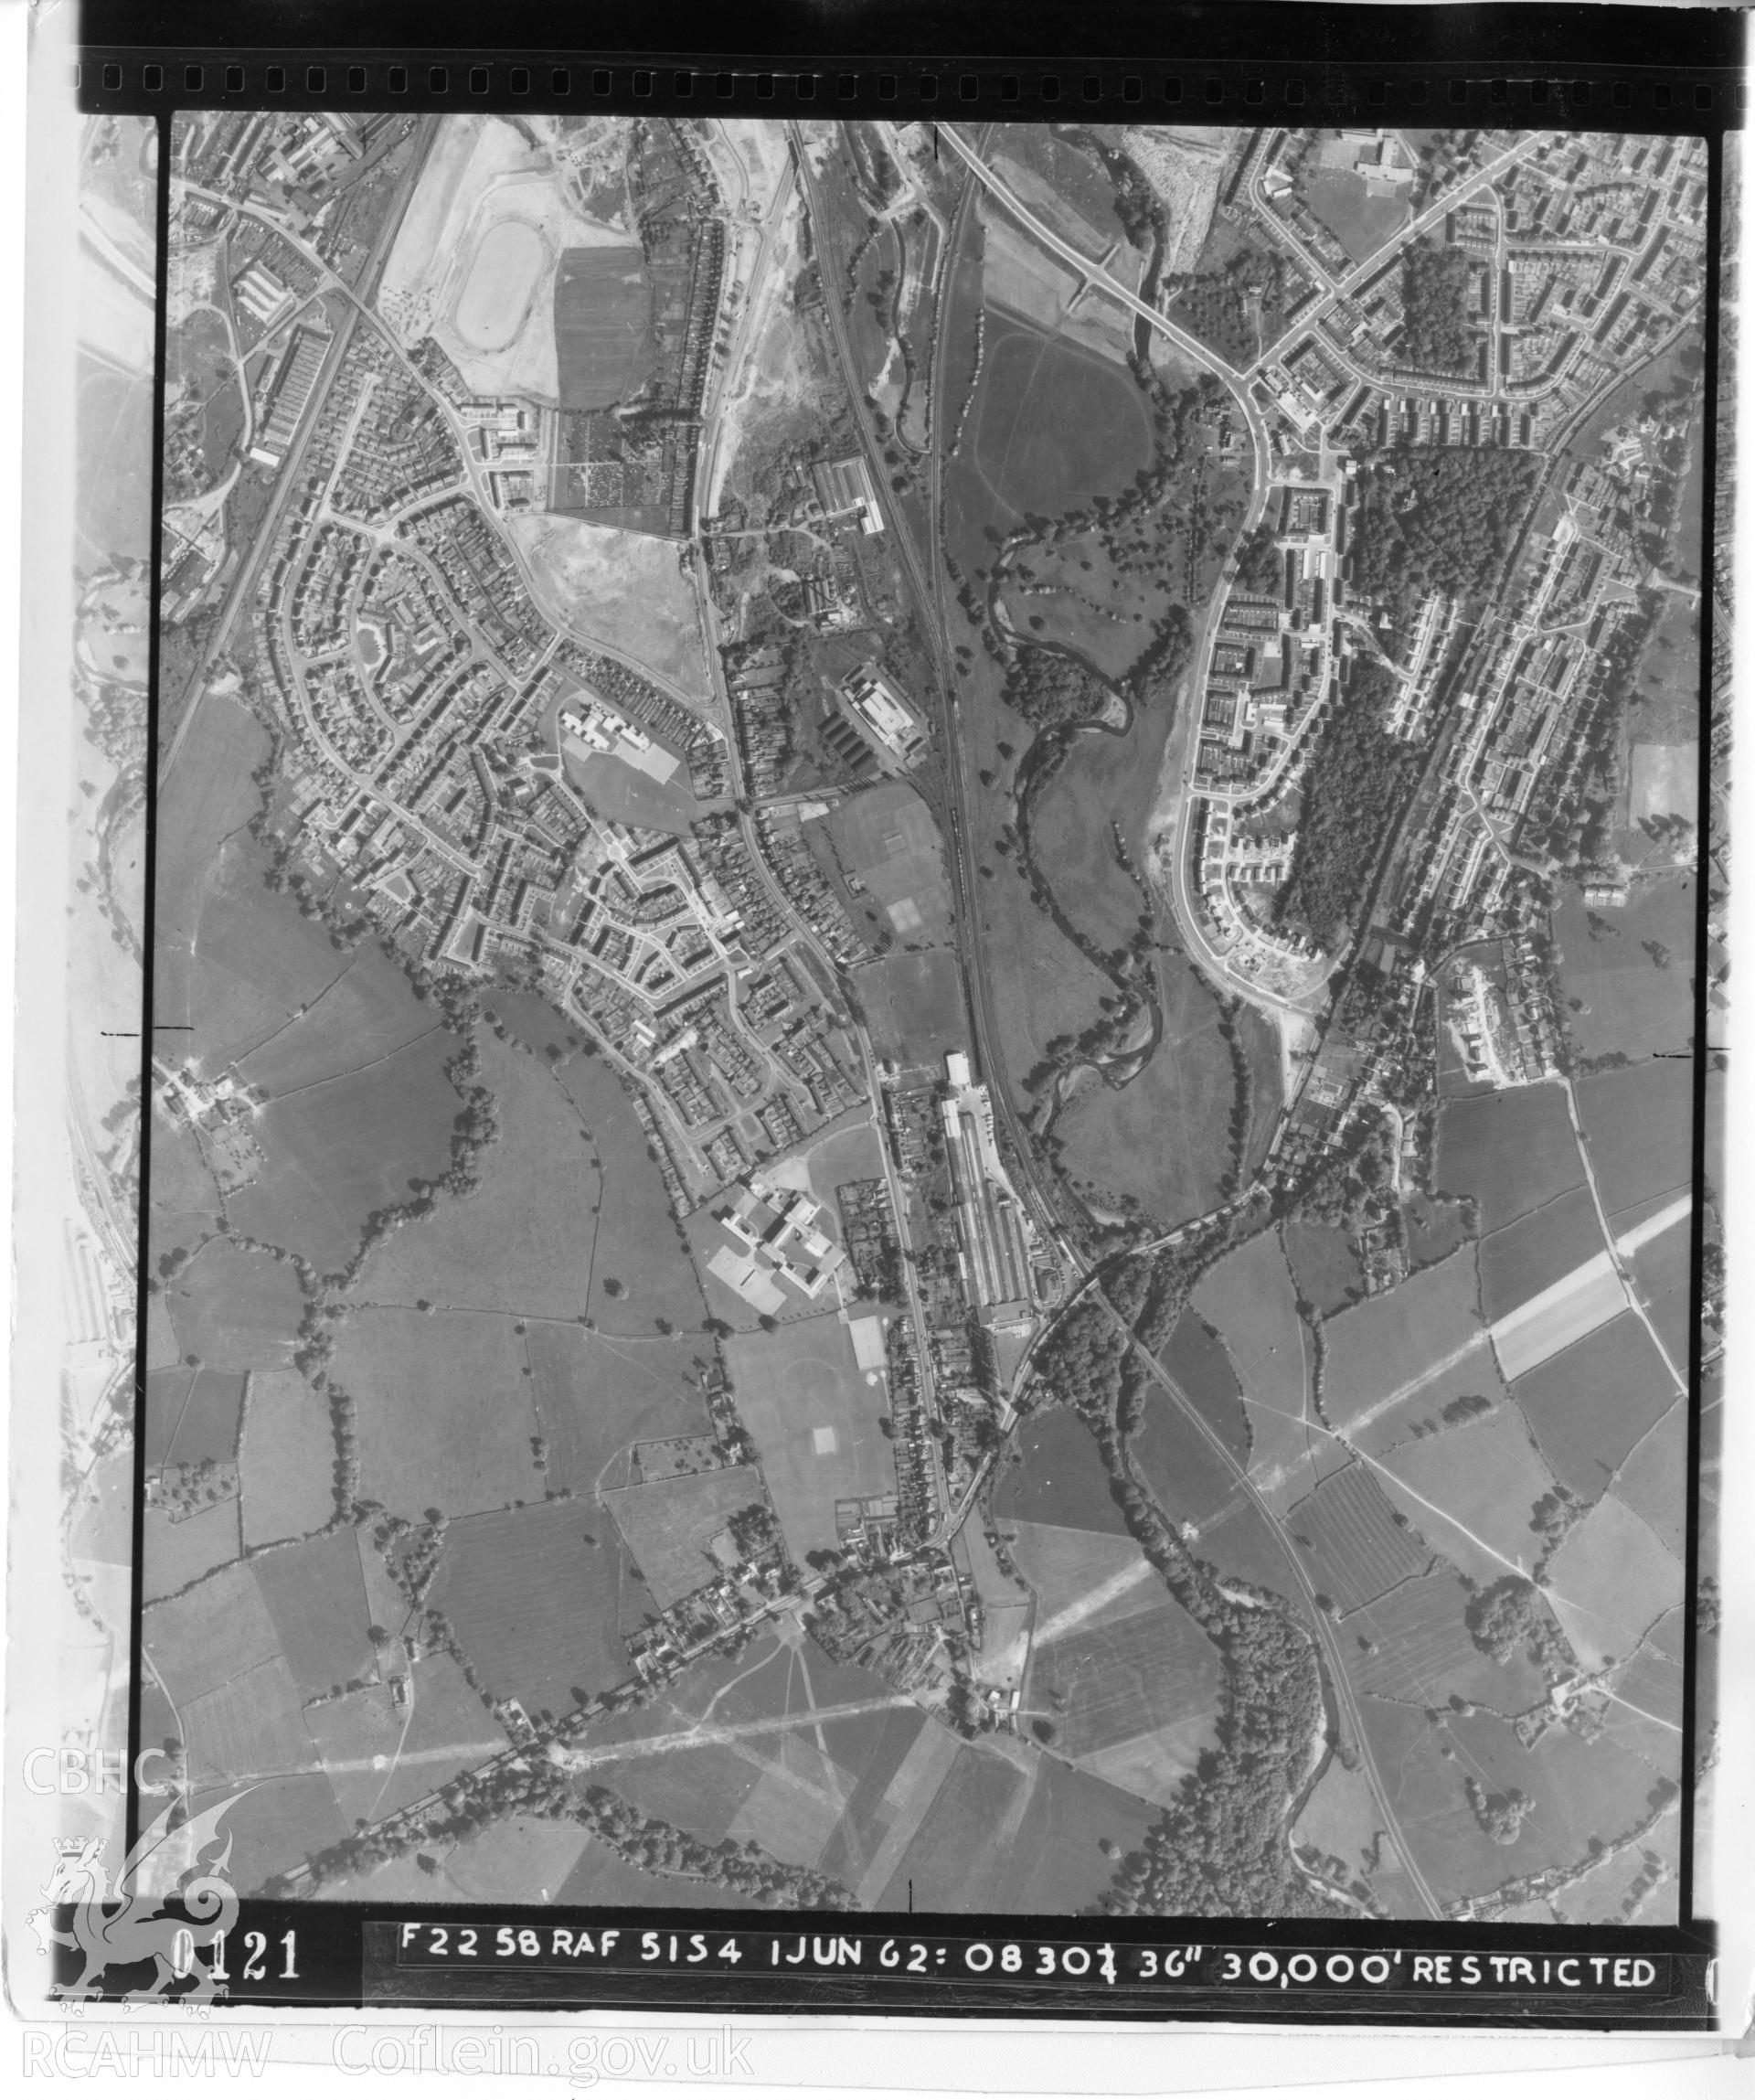 Aerial photograph of Cwmbran, taken on 1st June 1962. Included as part of Archaeology Wales' desk based assessment of former Llantarnam Community Primary School, Croeswen, Oakfield, Cwmbran, conducted in 2017.